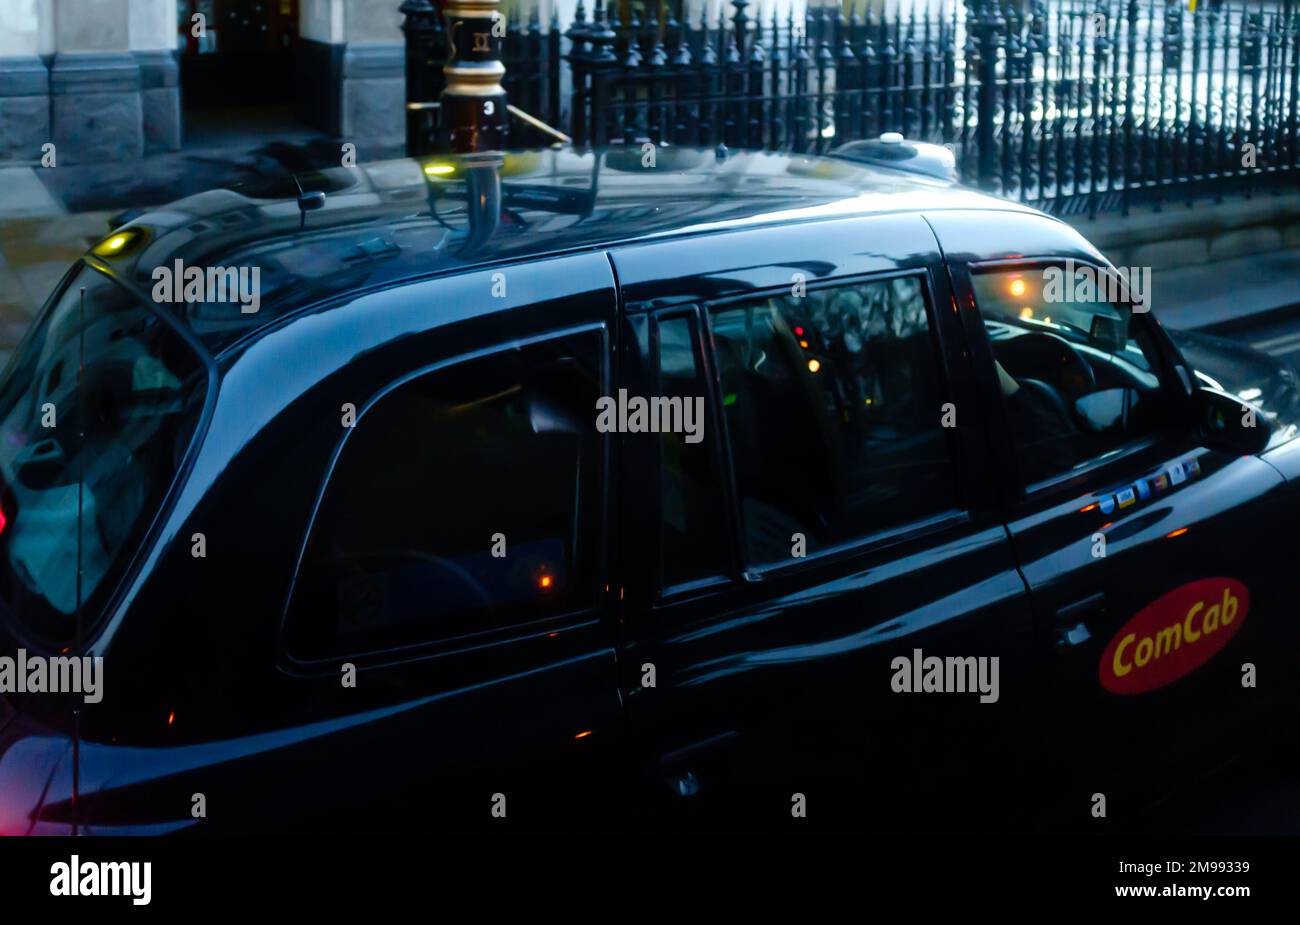 London, UK, 15th Dec. 2012: A typical black cabbie is driving through the city at sunrise. Stock Photo